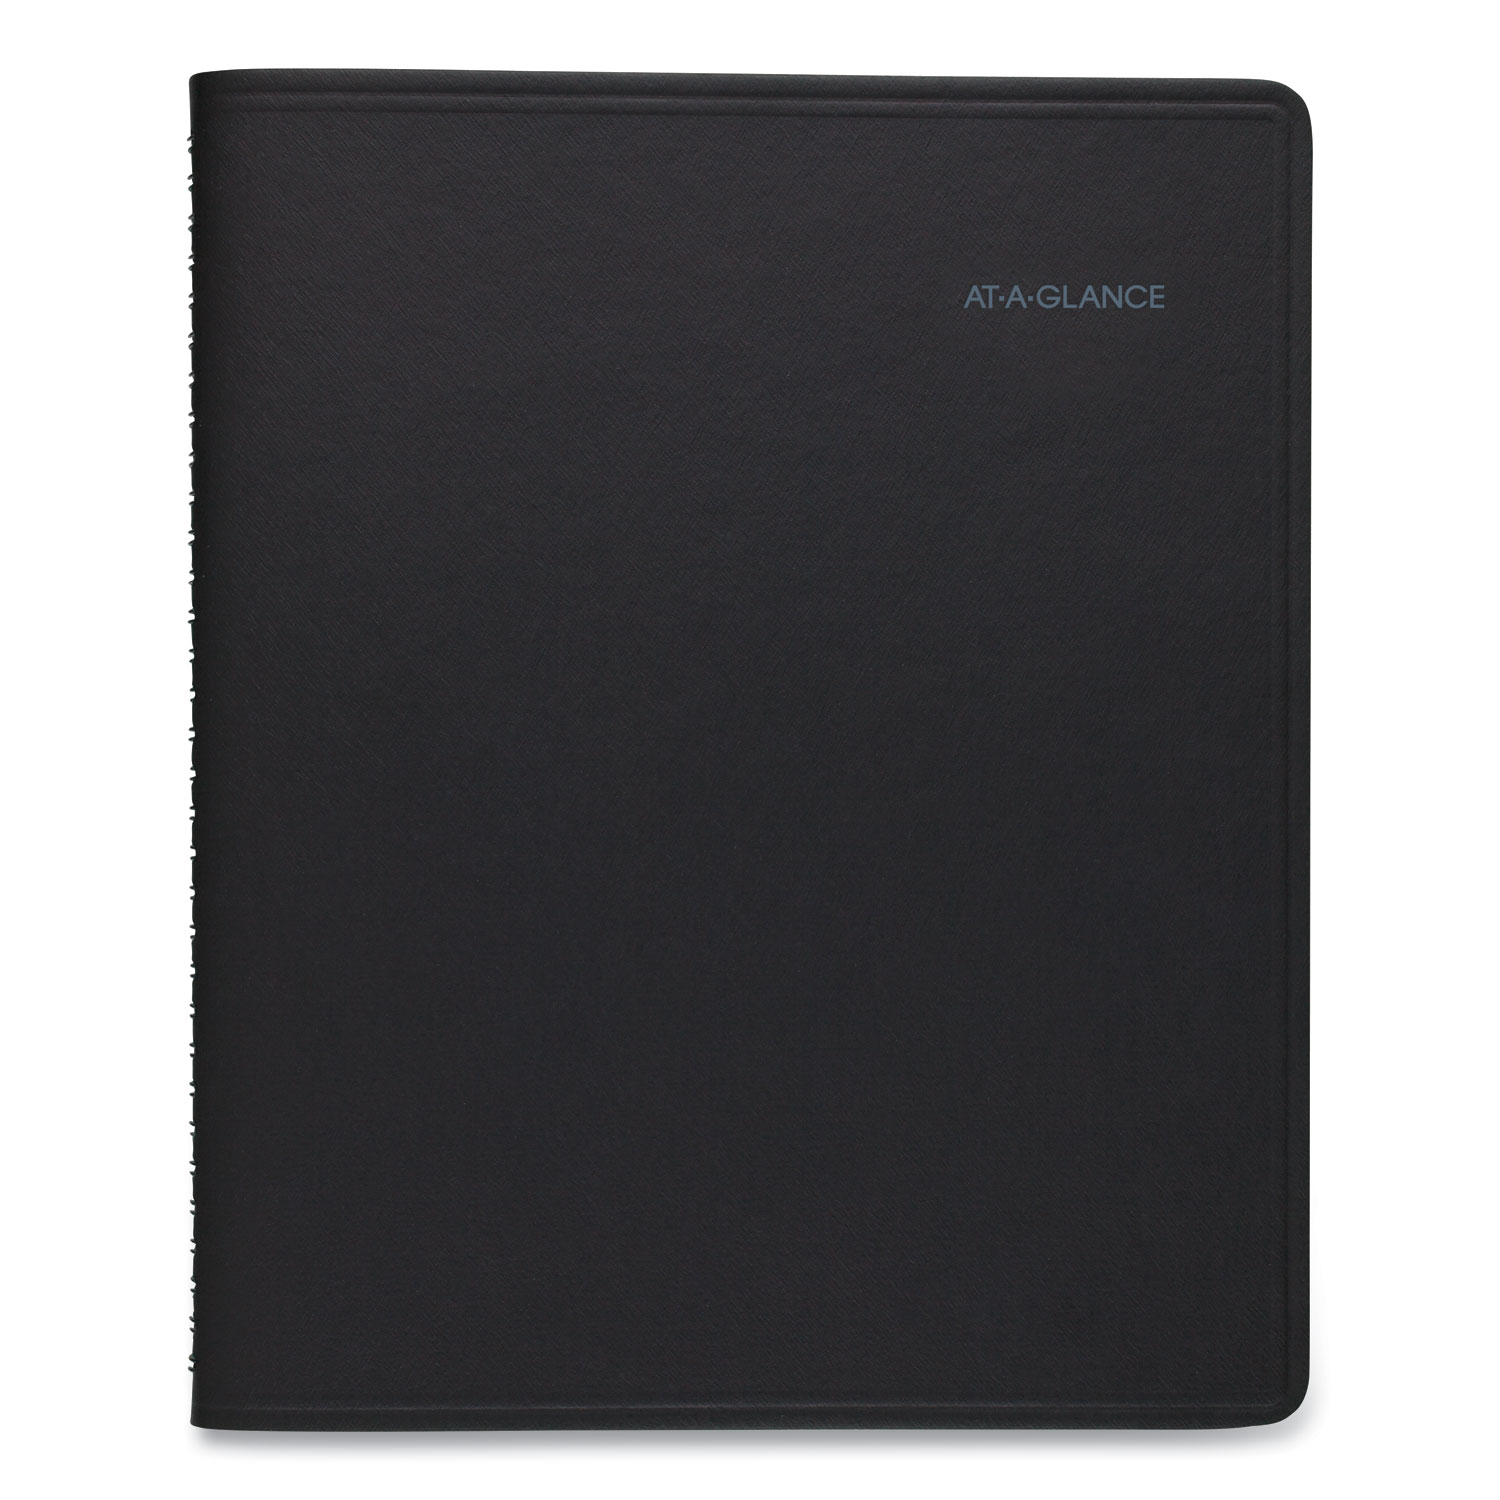  AT-A-GLANCE 760105 QuickNotes Weekly/Monthly Appointment Book, 9 7/8 x 7 5/8, Black, 2020 (AAG760105) 